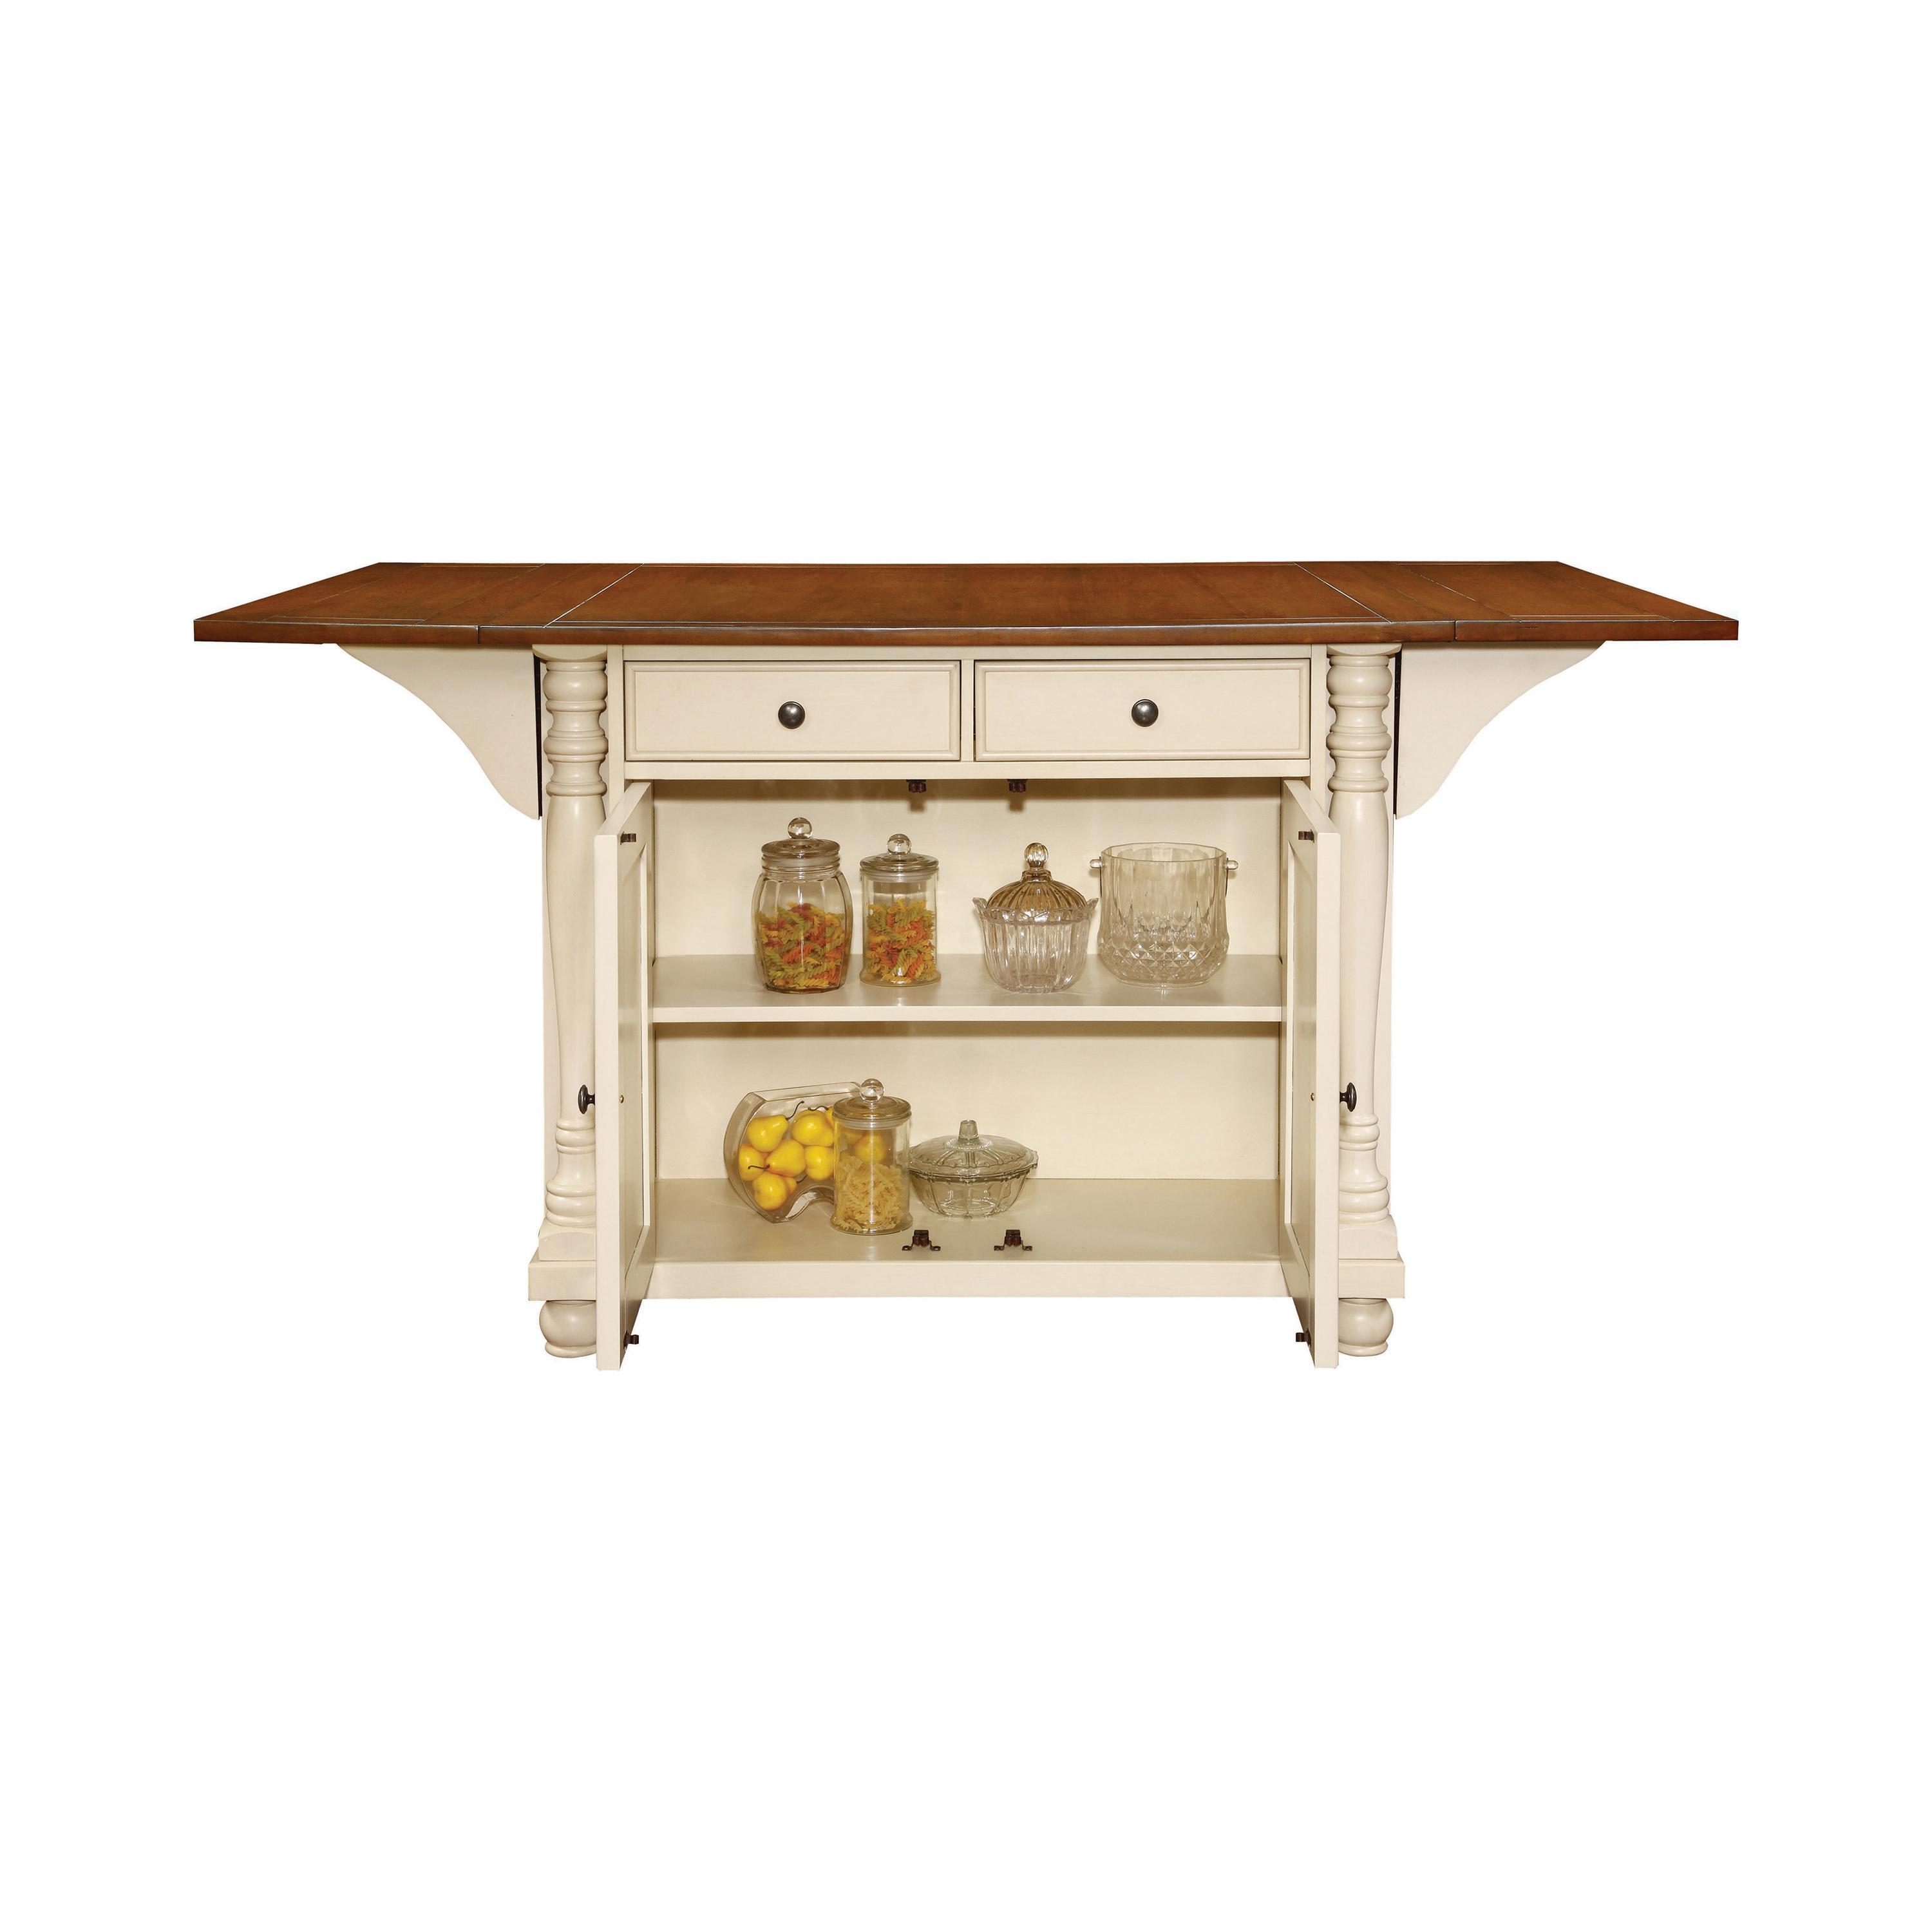 Transitional Kitchen Island 102271 Slater 102271 in White 